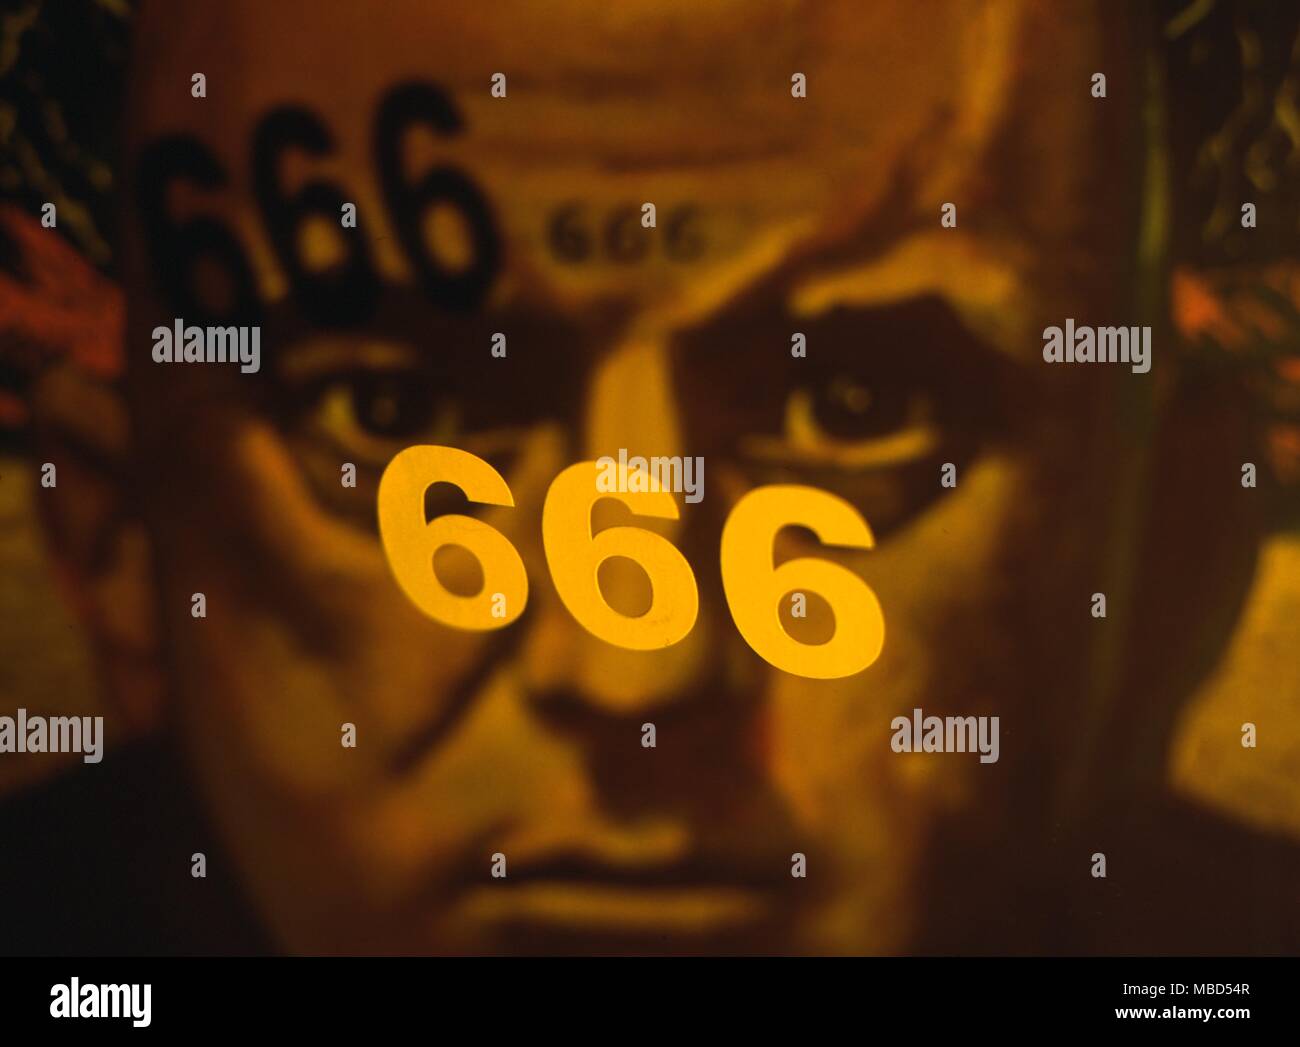 Numerology - number of the beast - The number 666 has been adopted from the biblical Revelation as the number of the Beast. Aleister Crowley, who called himself The Great Beast regarded it as his own number. The numbers add up to 18, which is lunar. - © / CW Stock Photo